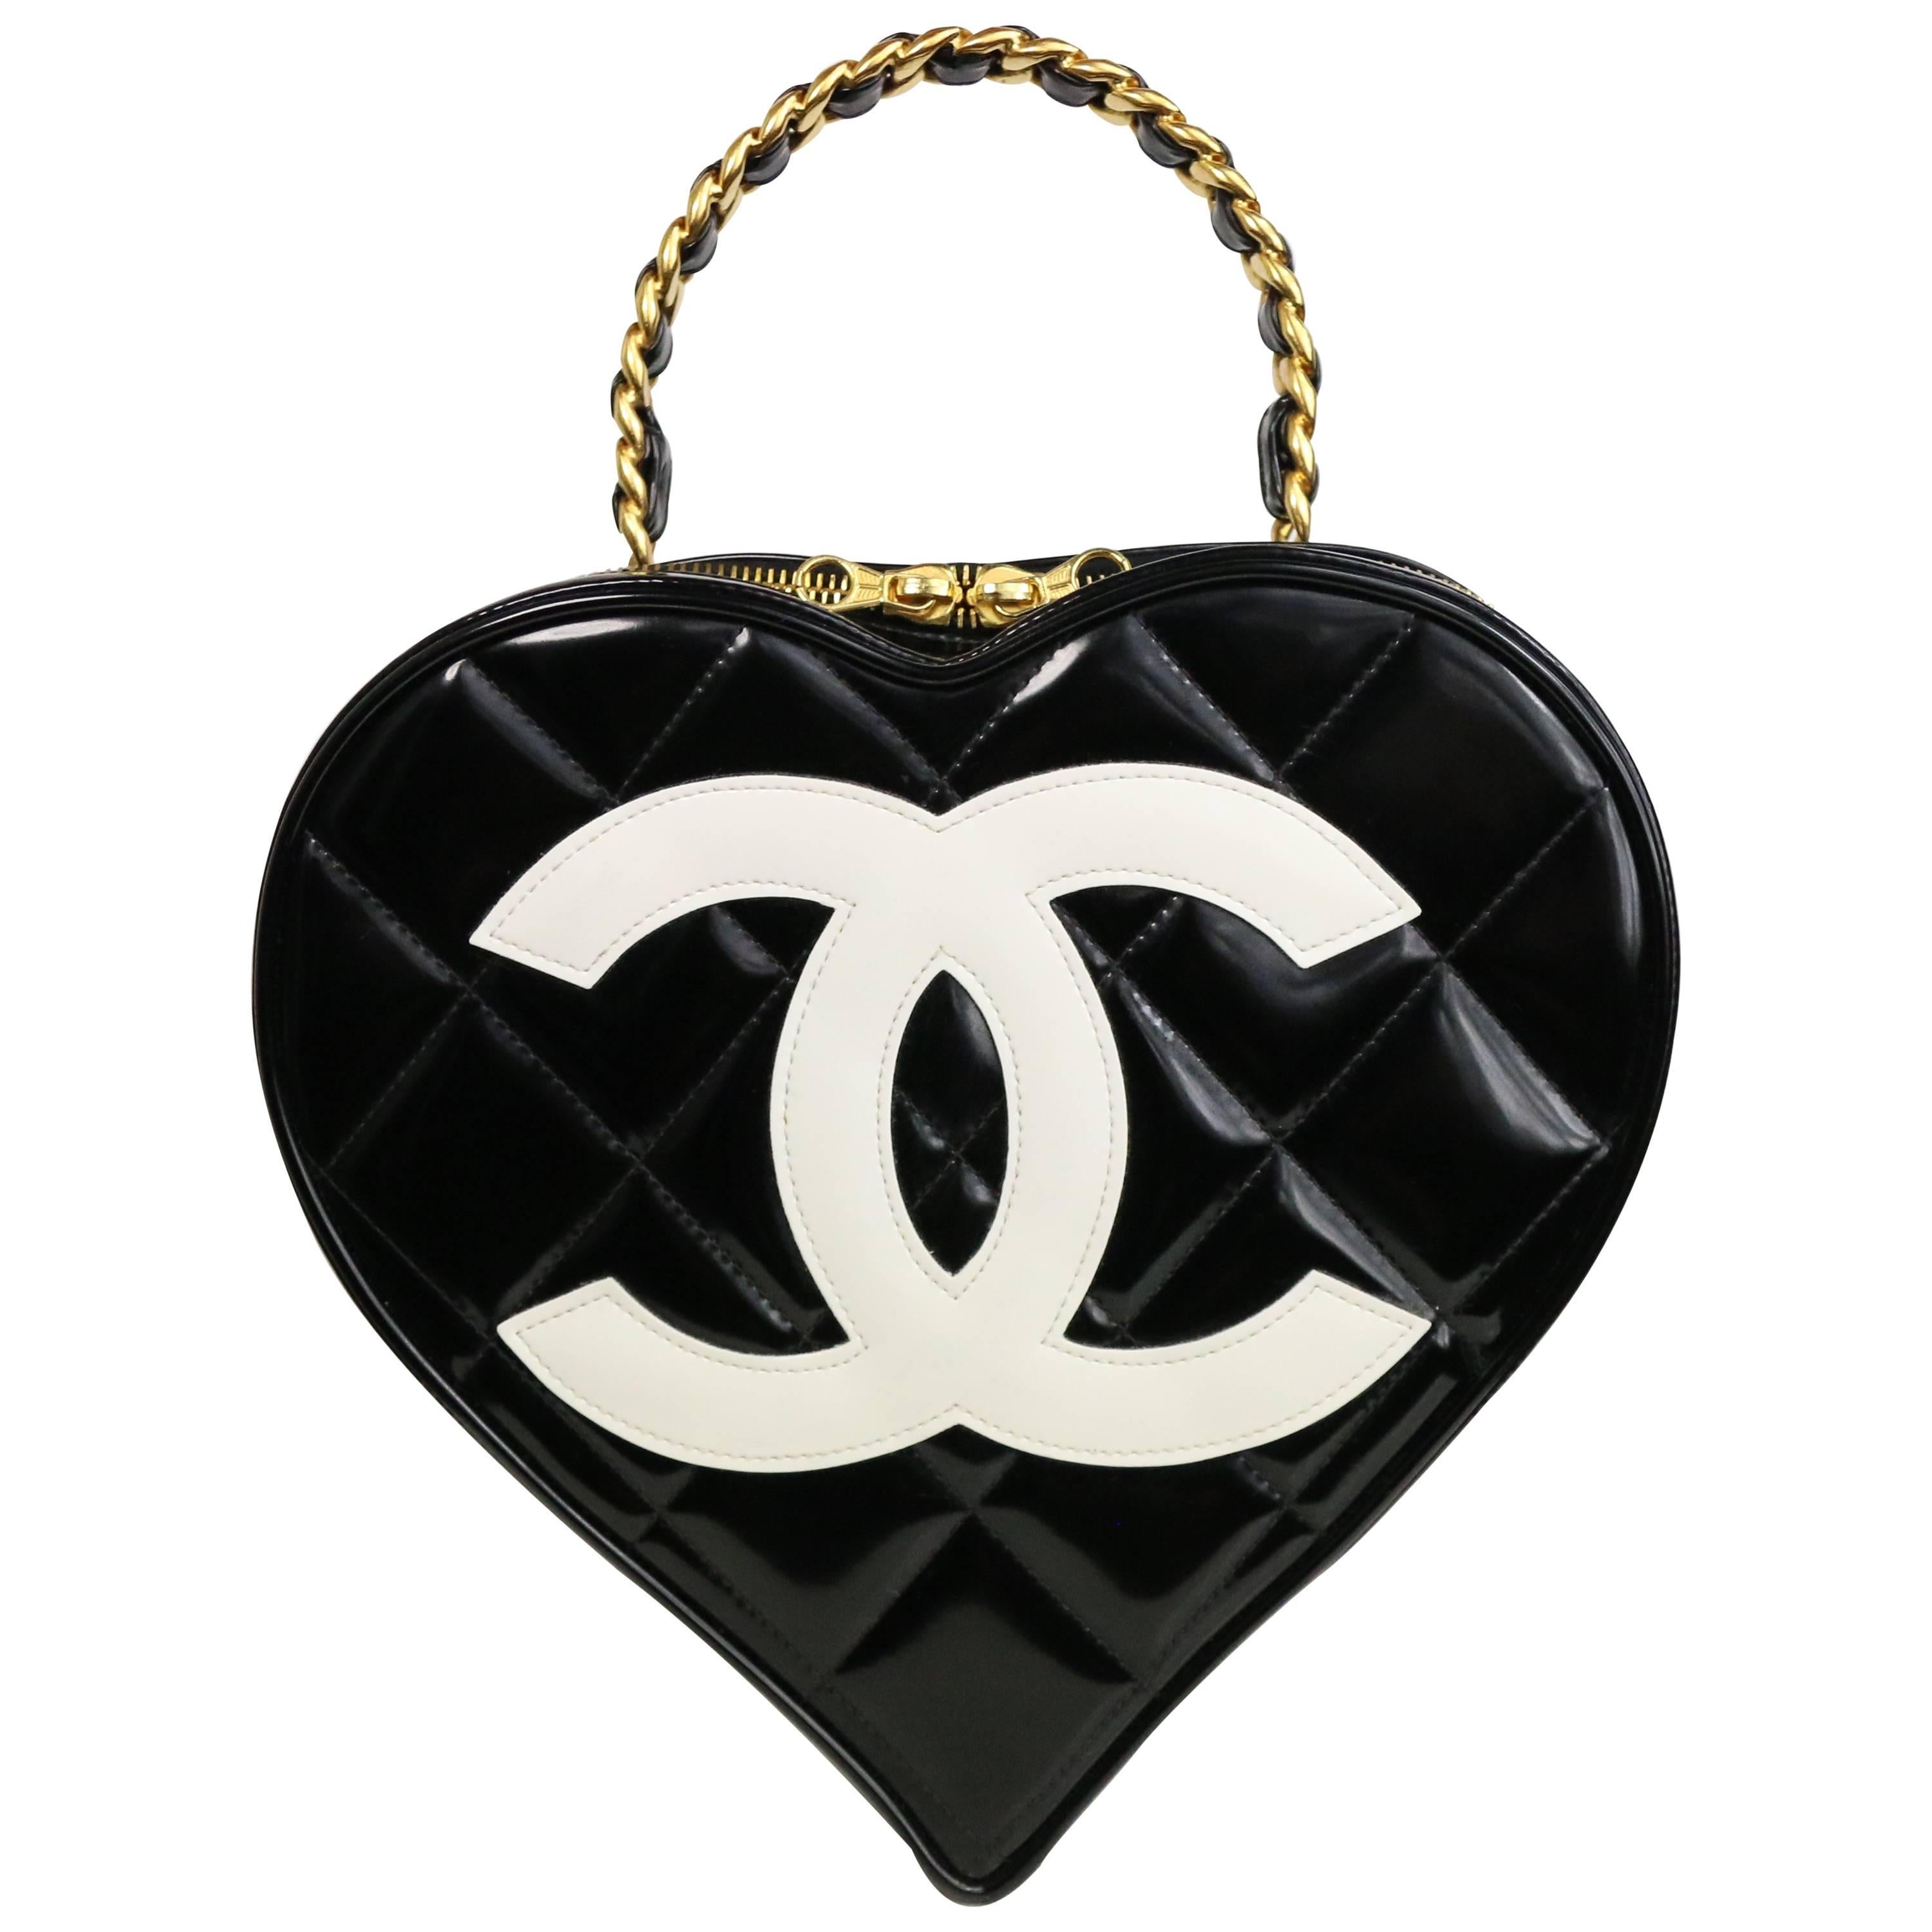 Chanel Black Patent Quilted Leather Heart-Shaped Vanity Chain Handbag